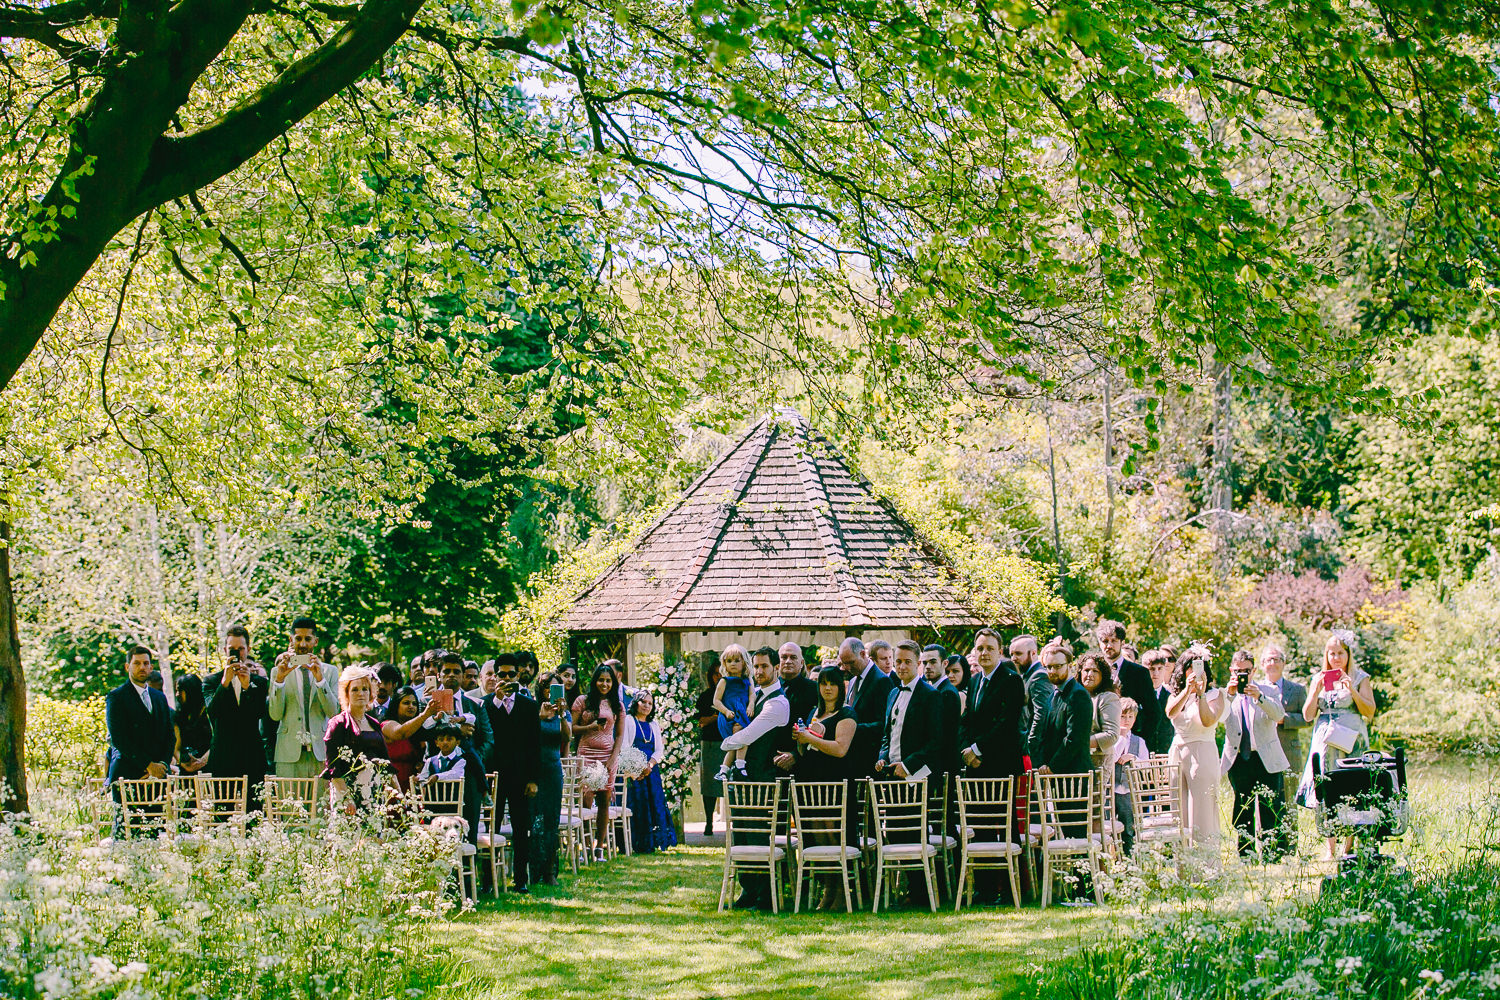 Wedding guests at an outdoor wedding ceremony at Chippenham park